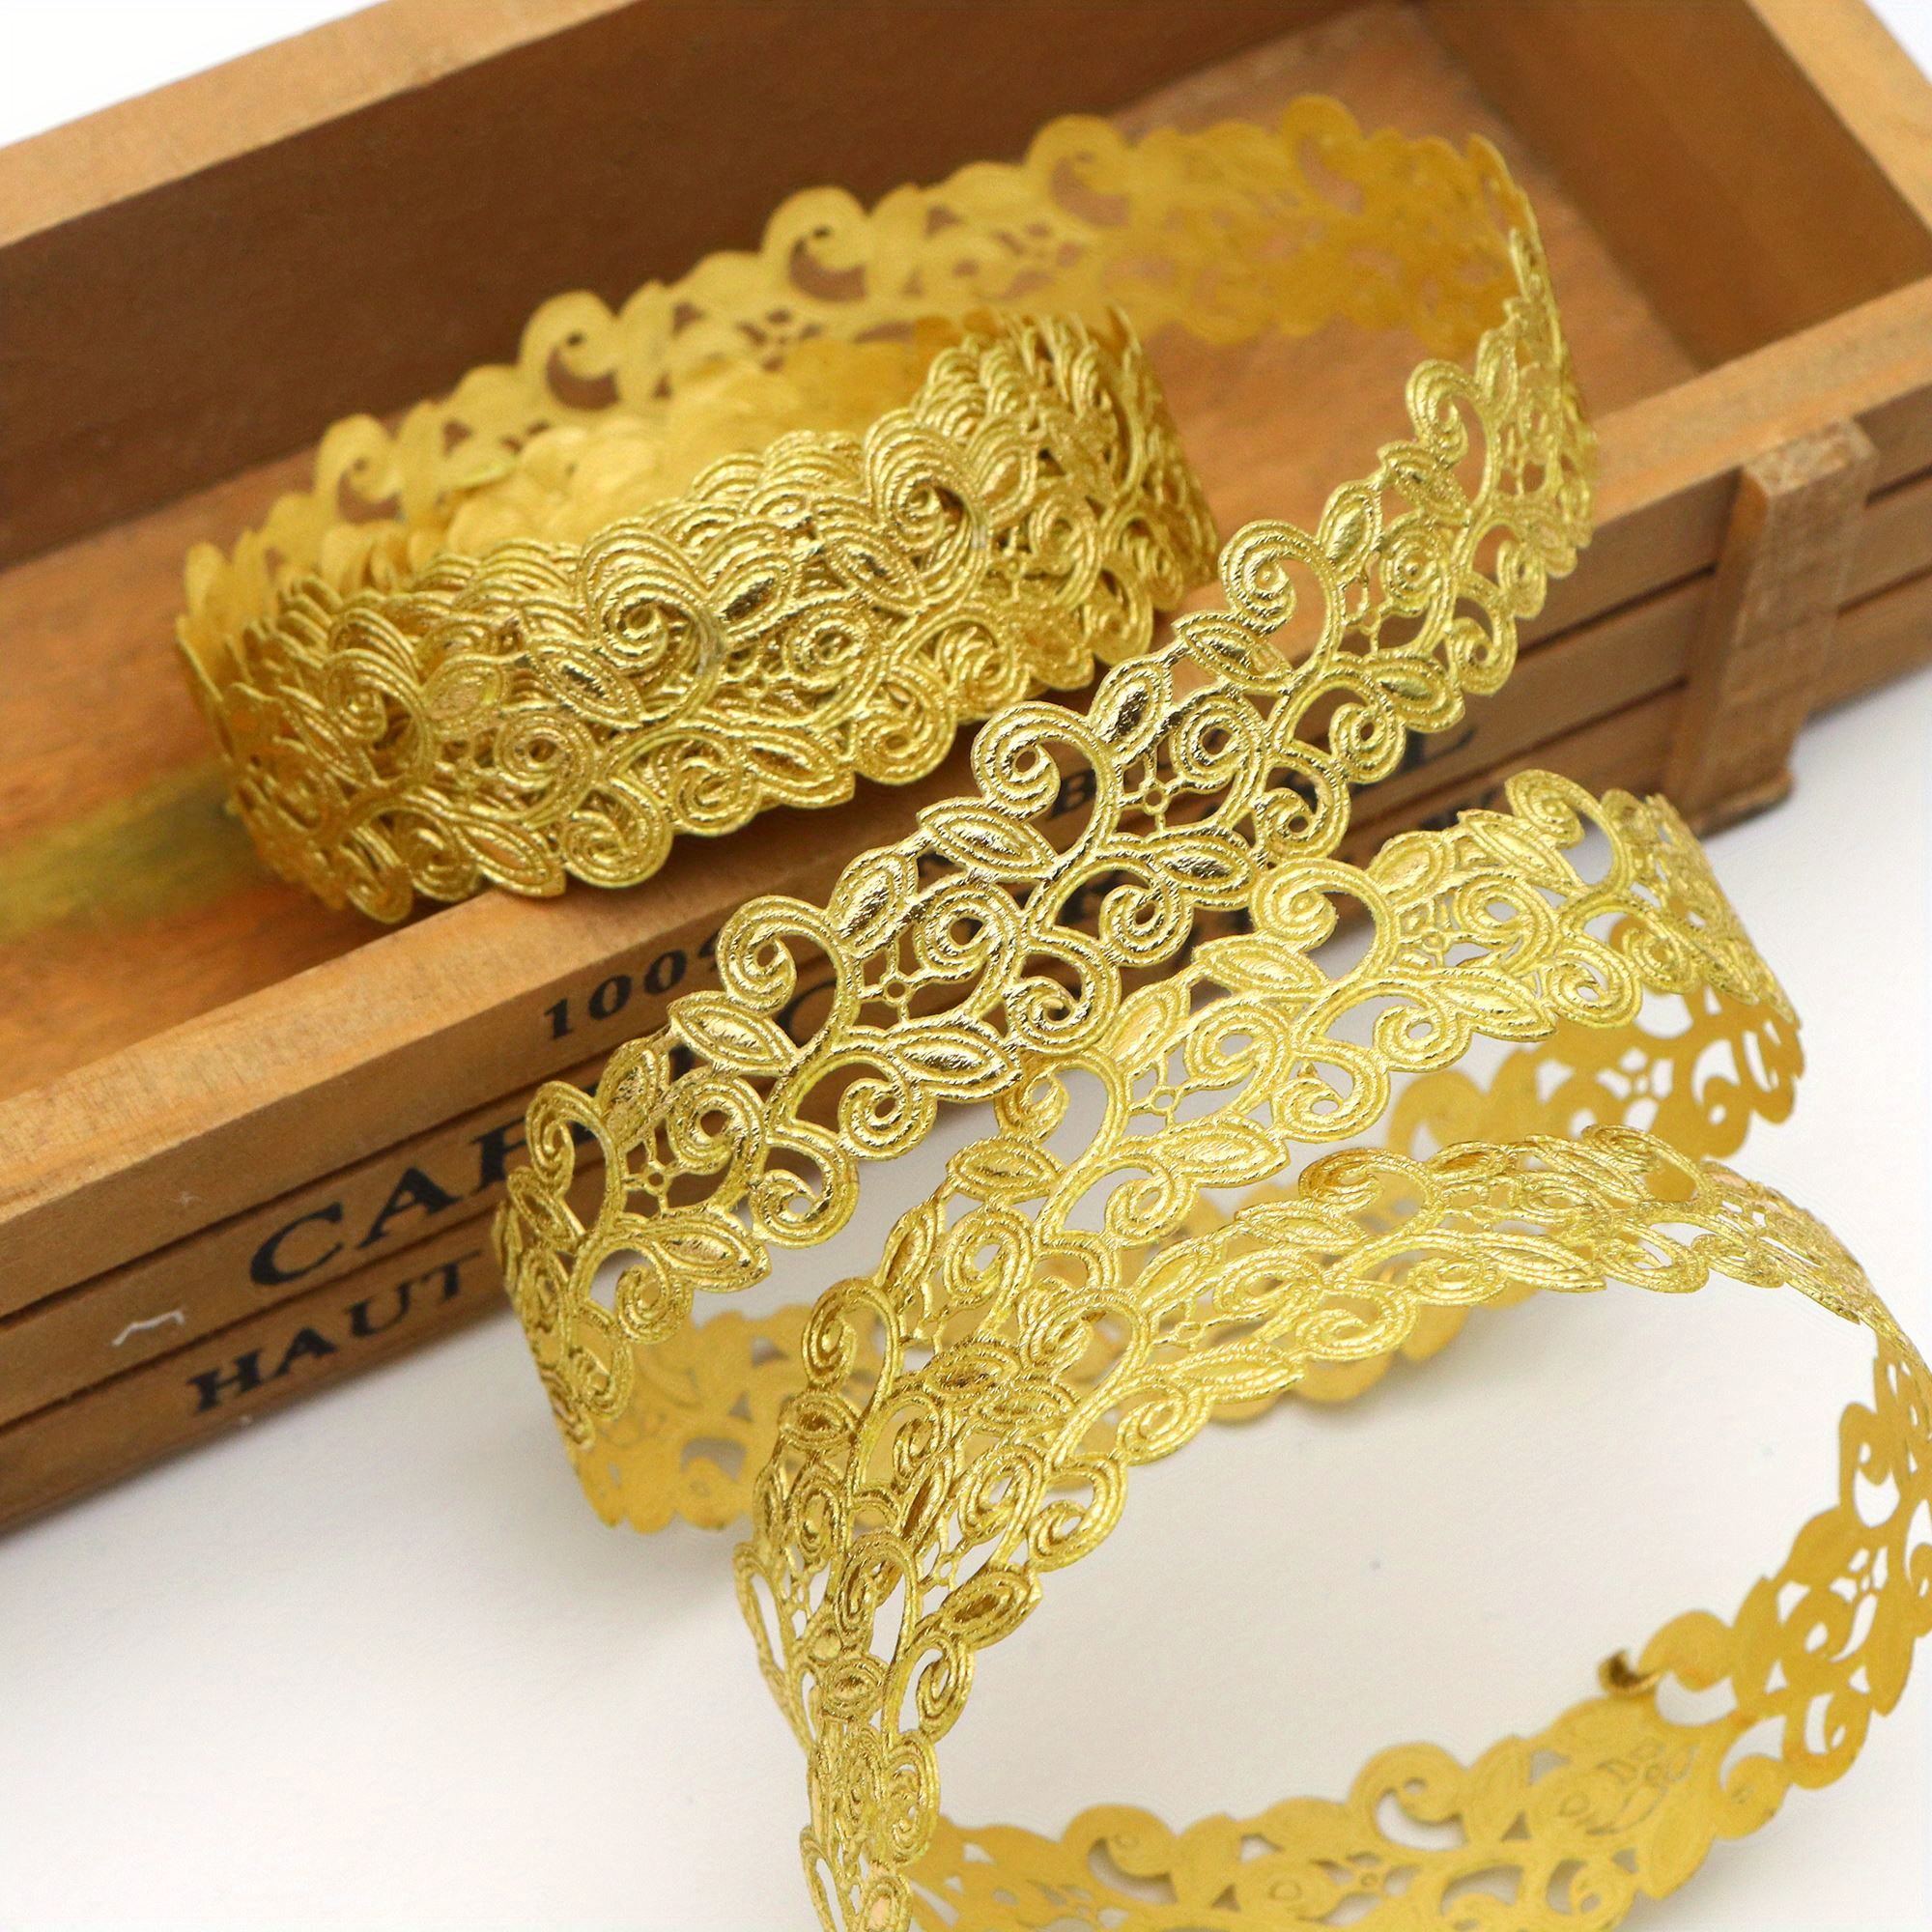 

1 Roll 5 Yards 0.87in/22mm Golden Hollow Cut Out Flower Ribbon For Clothing Trim Accessories Diy Scrapbooking Gift Wrapping Sewing Birthday Party Home Decor